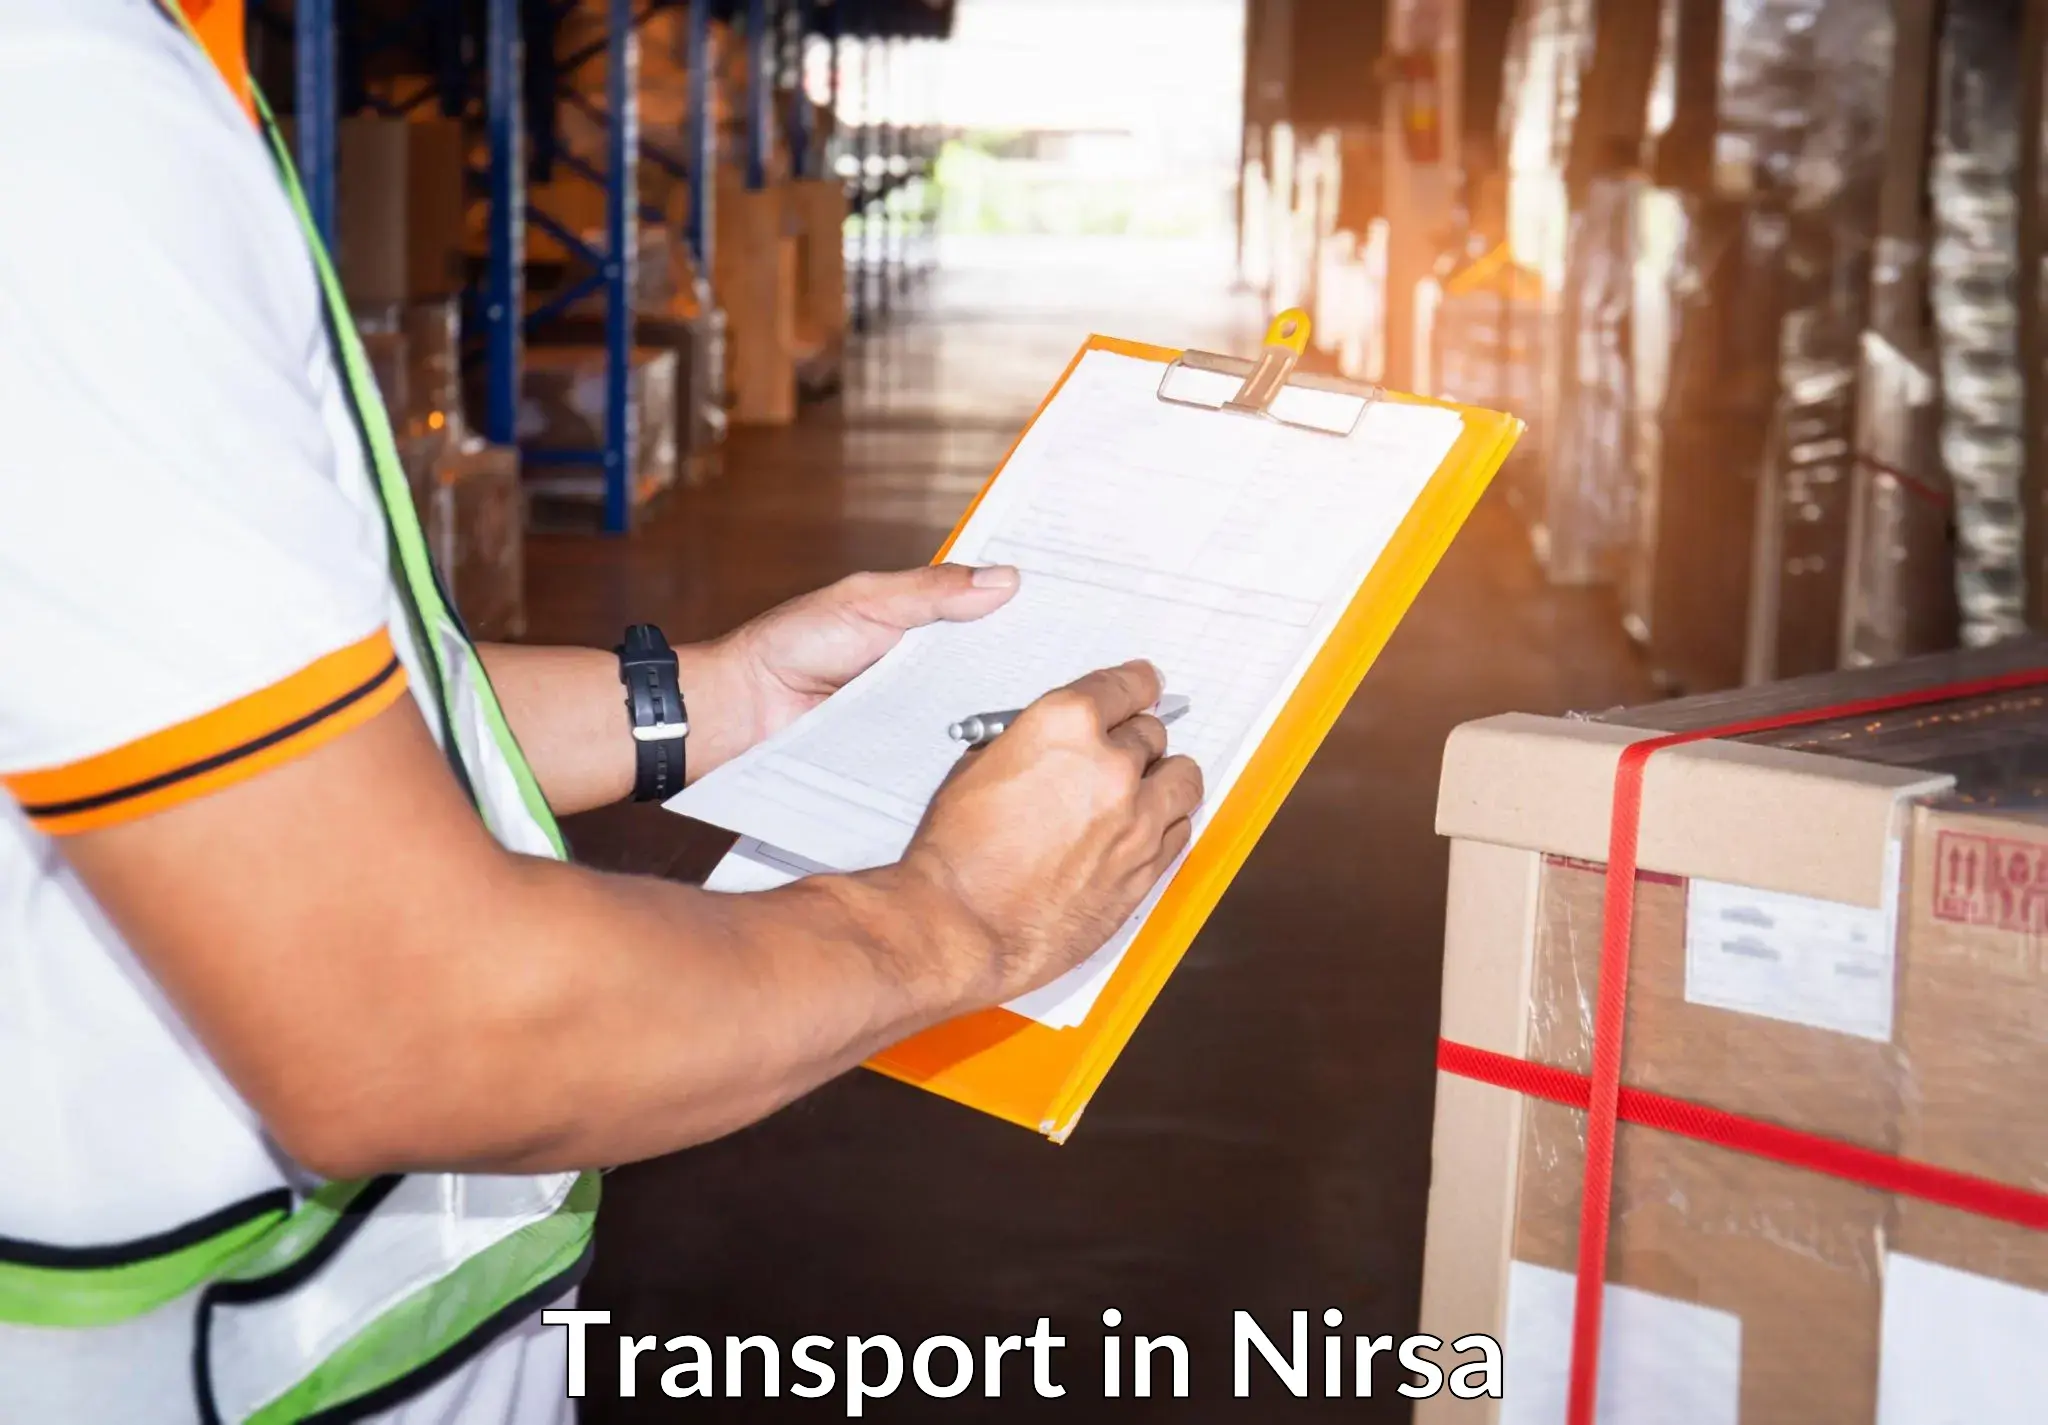 Vehicle transport services in Nirsa